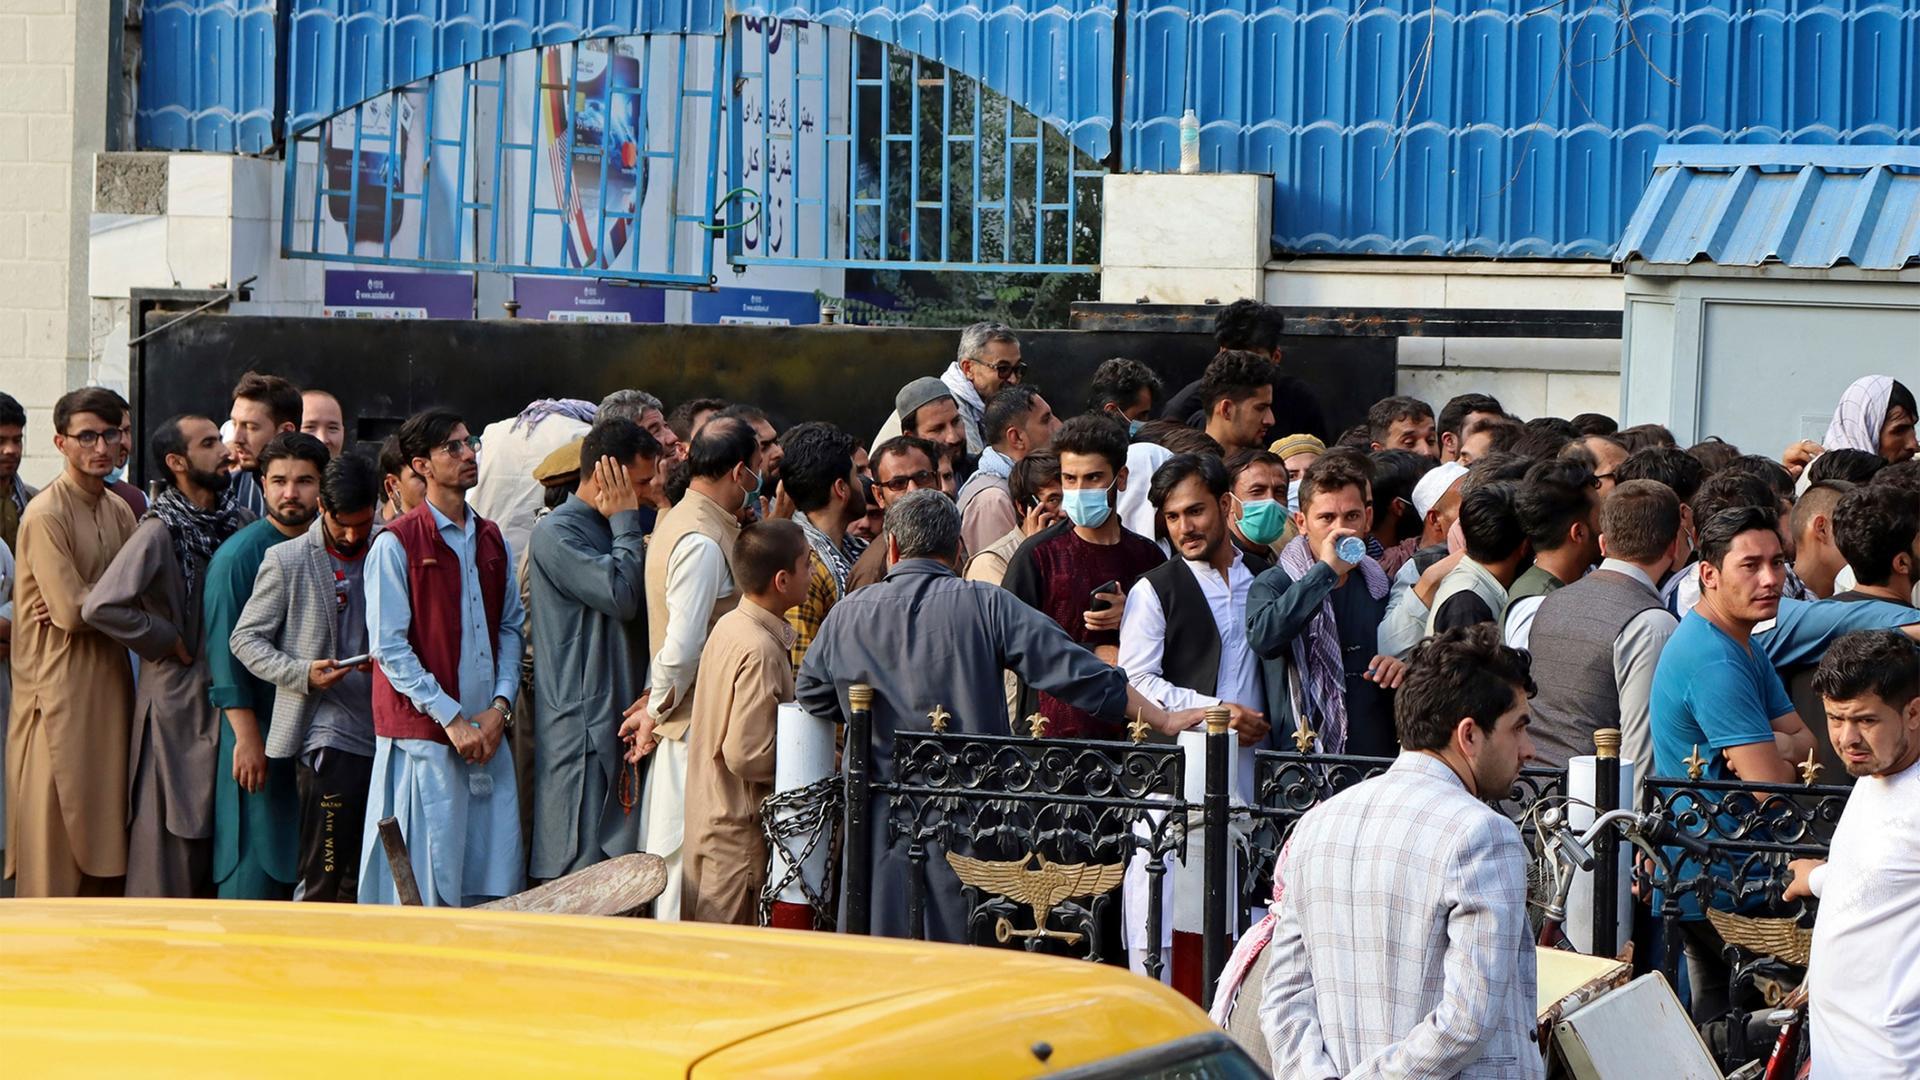 Afghans wait in long lines for hours to try to withdraw money, in front of a Bank in Kabul, Afghanistan